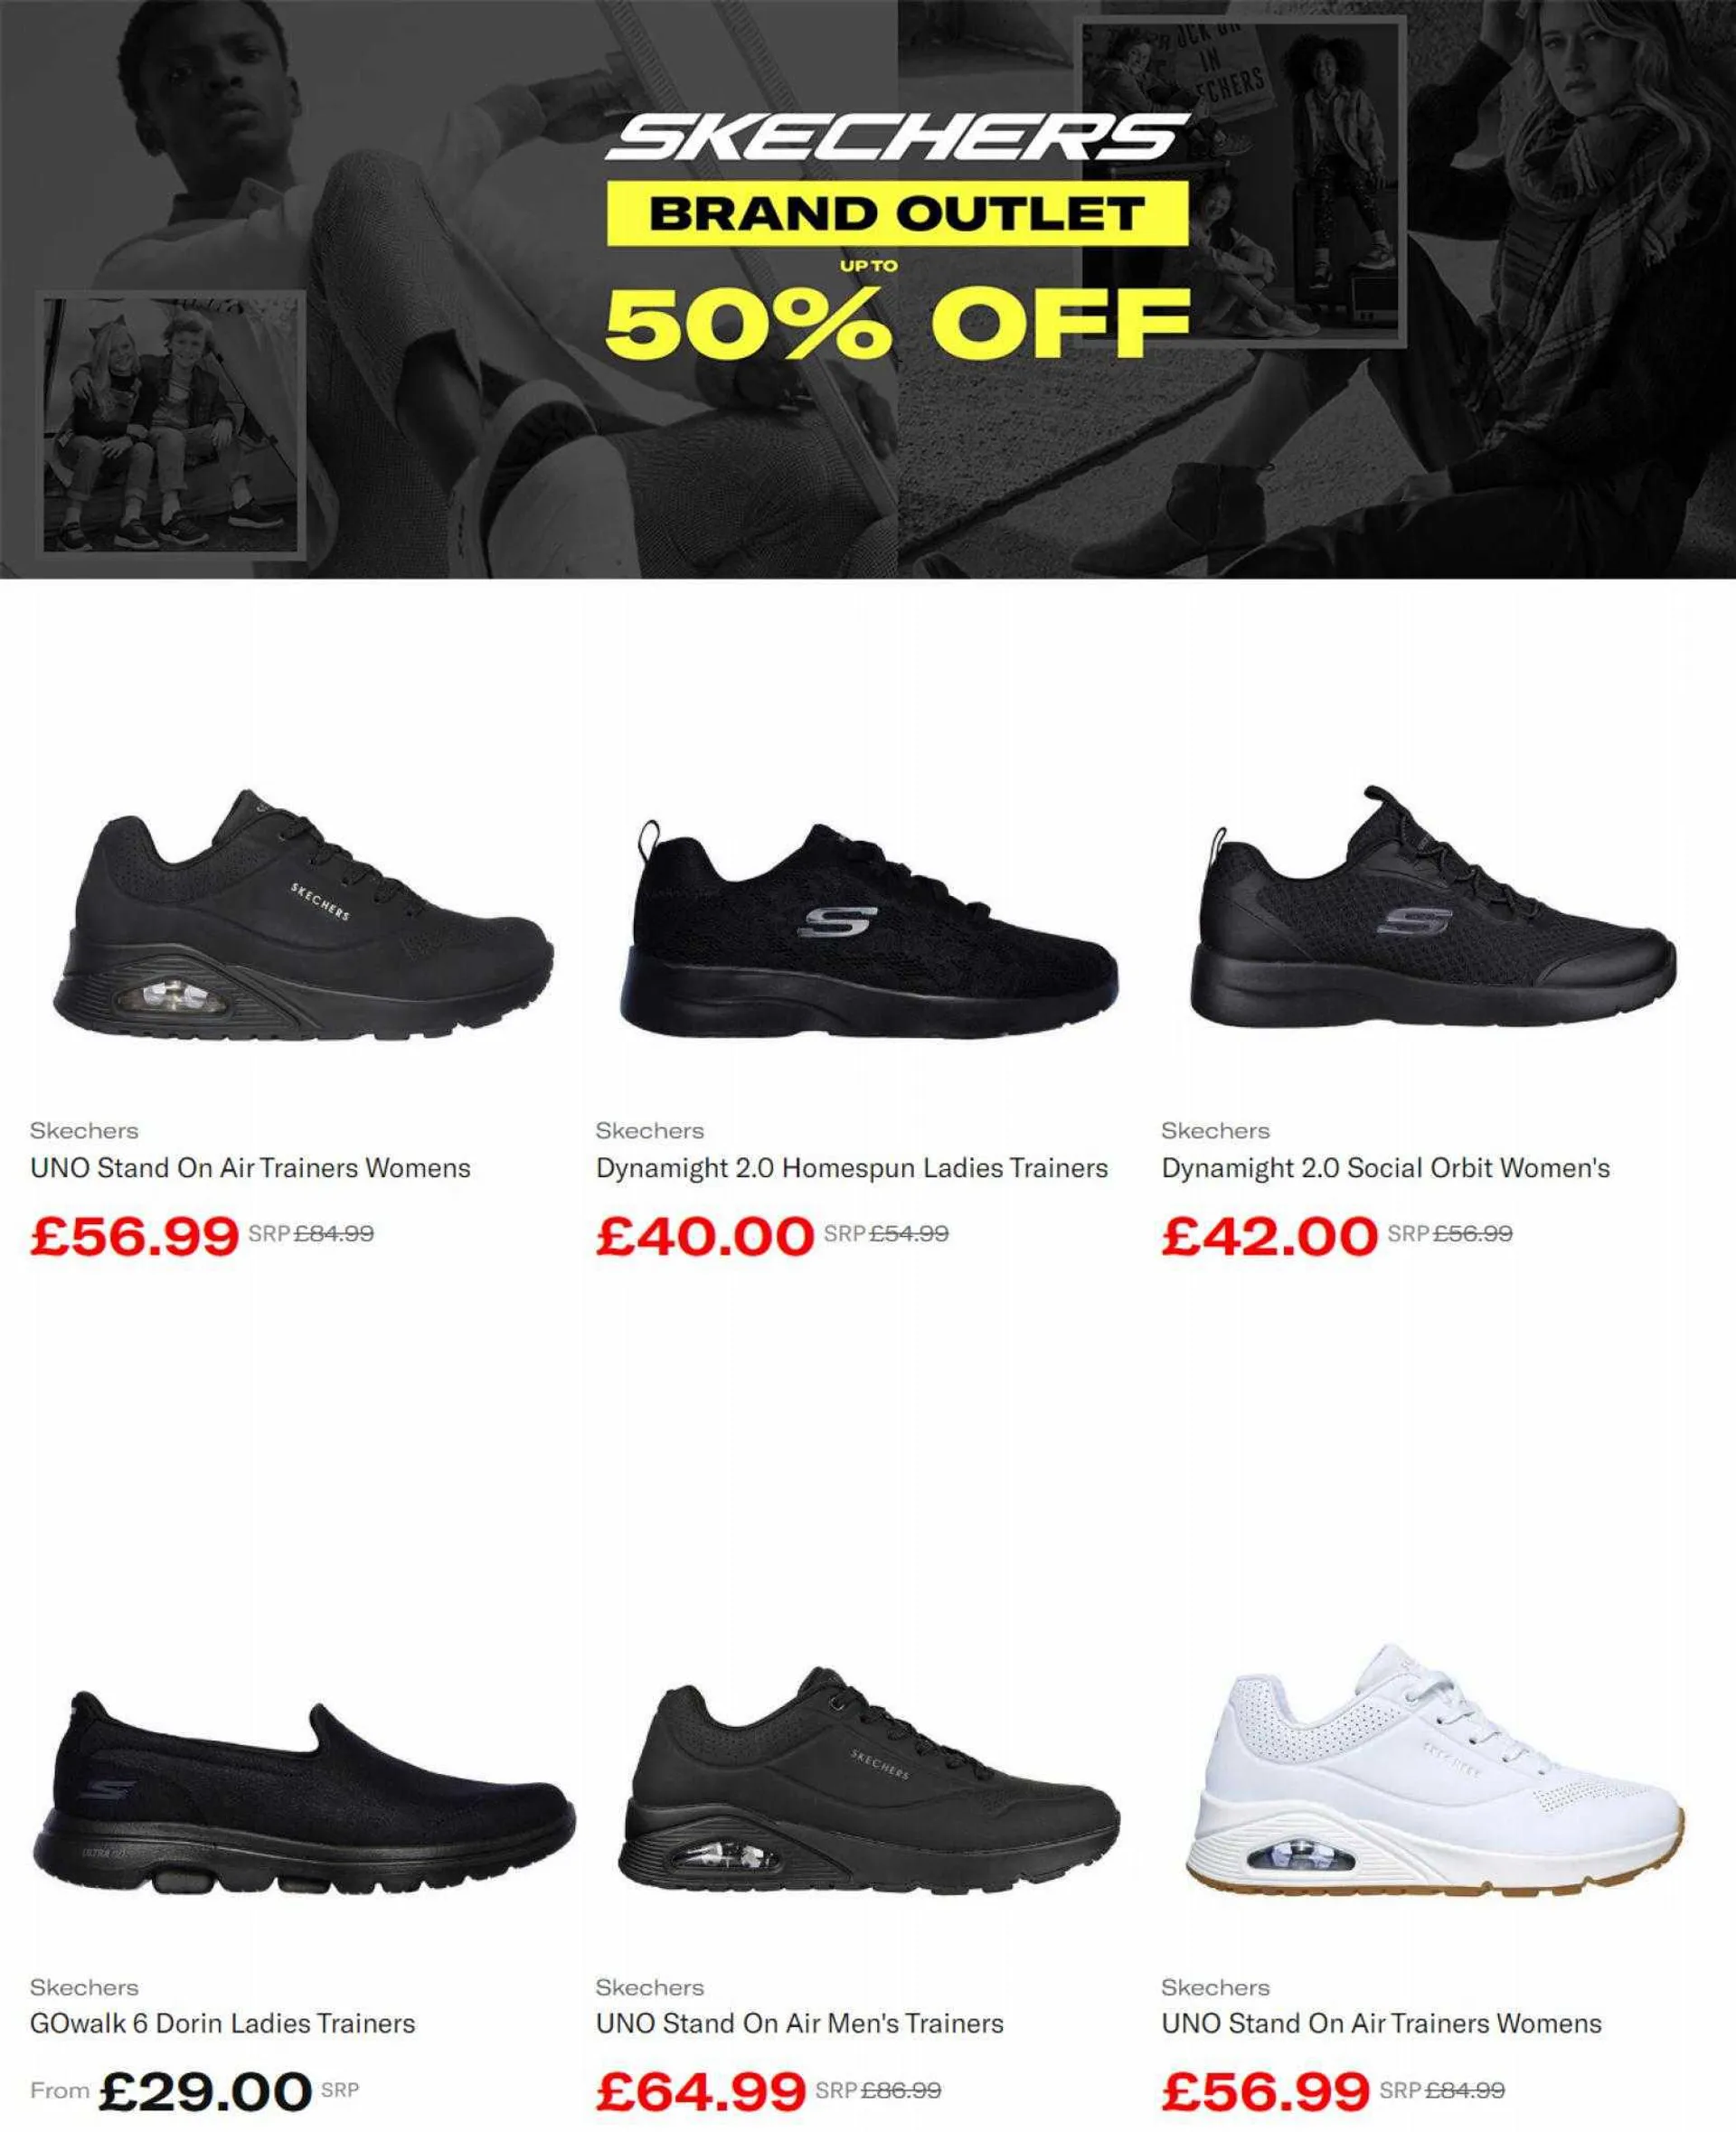 Sports Direct Weekly Offers - 1